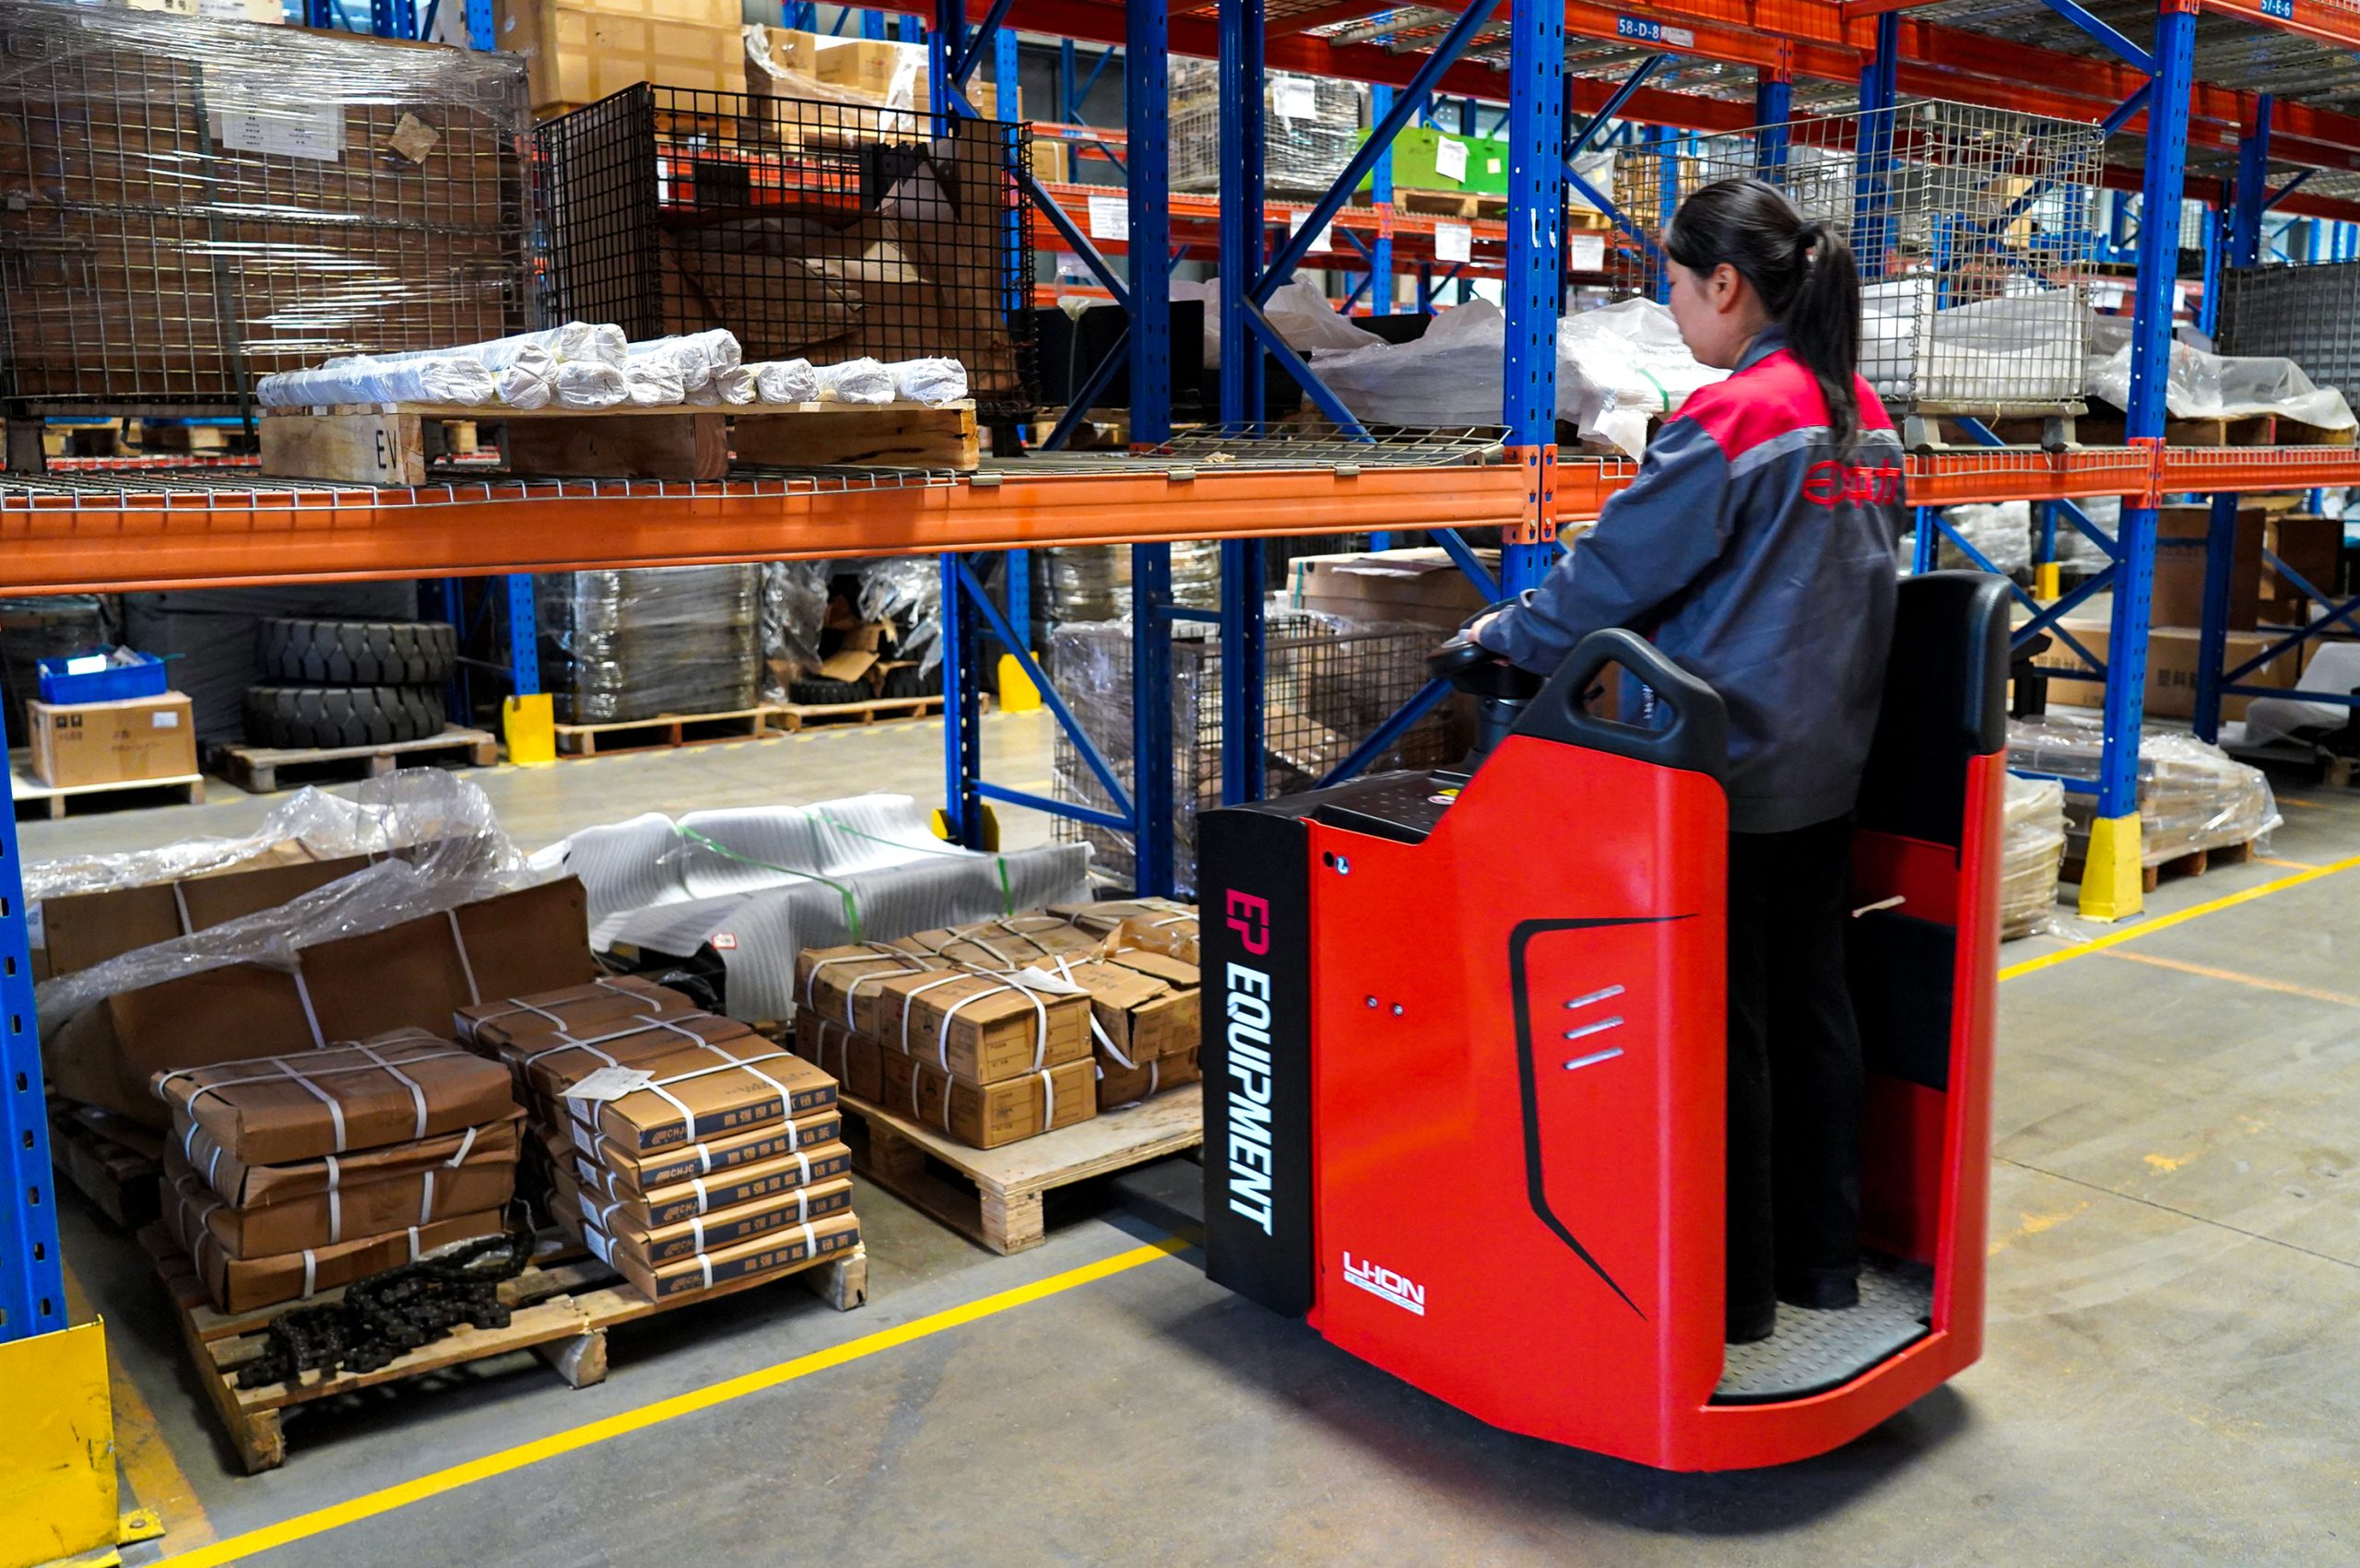 KPL201 electric pallet truck being used in a warehouse.